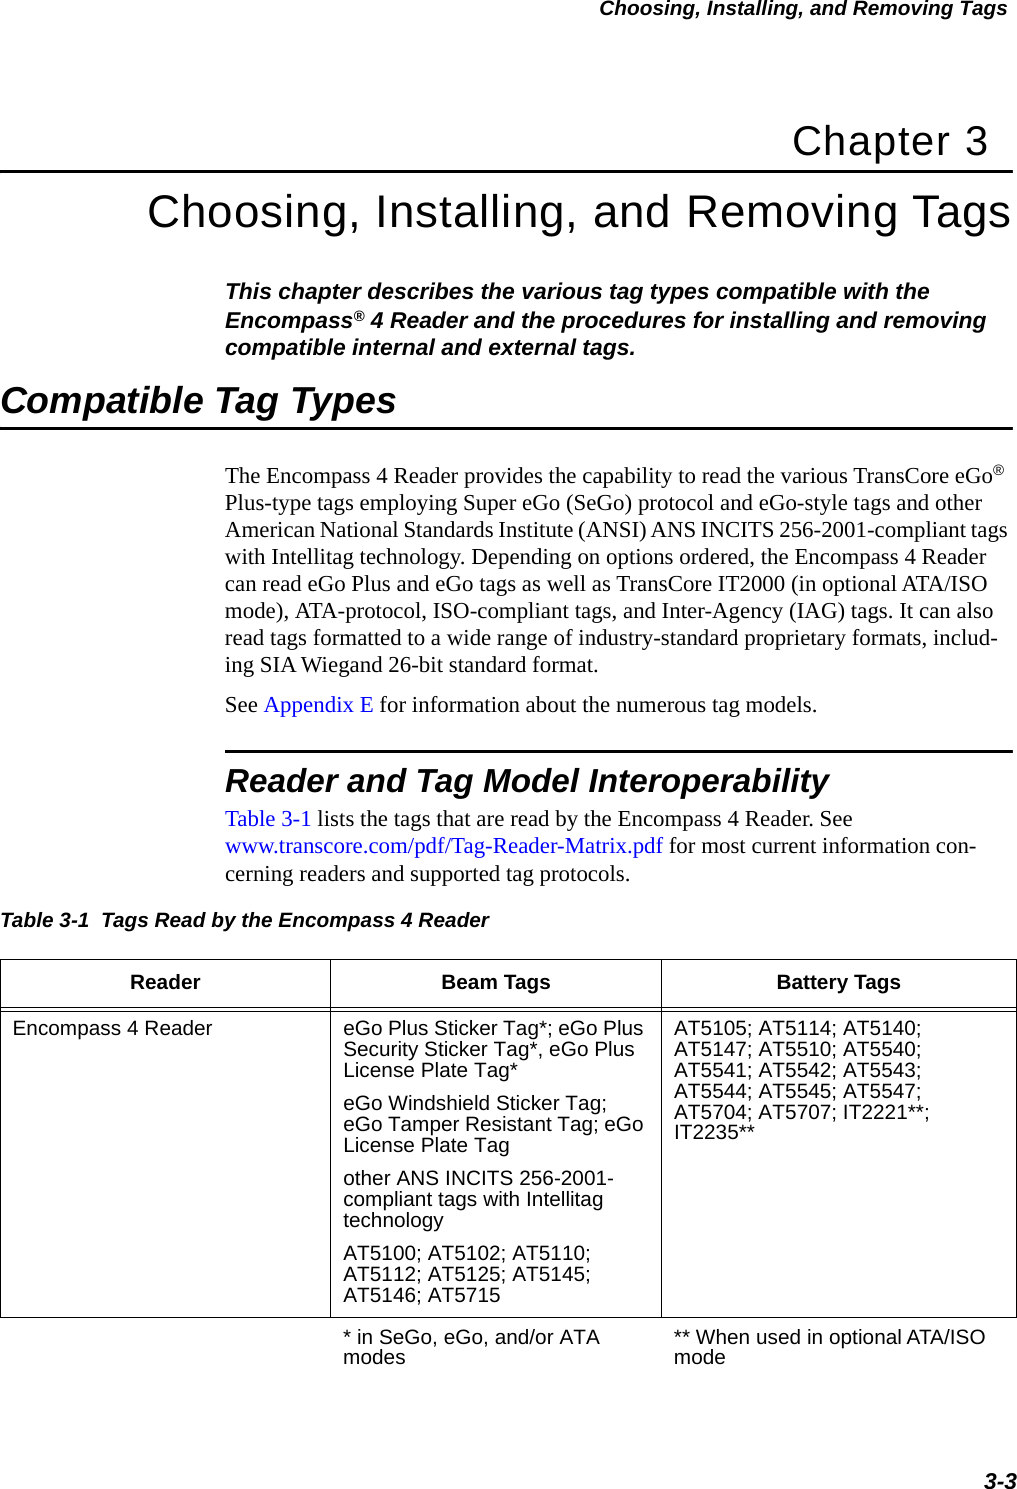 Choosing, Installing, and Removing Tags3-3Chapter 3Choosing, Installing, and Removing TagsThis chapter describes the various tag types compatible with the Encompass® 4 Reader and the procedures for installing and removing compatible internal and external tags. Compatible Tag TypesThe Encompass 4 Reader provides the capability to read the various TransCore eGo® Plus-type tags employing Super eGo (SeGo) protocol and eGo-style tags and other American National Standards Institute (ANSI) ANS INCITS 256-2001-compliant tags with Intellitag technology. Depending on options ordered, the Encompass 4 Reader can read eGo Plus and eGo tags as well as TransCore IT2000 (in optional ATA/ISO mode), ATA-protocol, ISO-compliant tags, and Inter-Agency (IAG) tags. It can also read tags formatted to a wide range of industry-standard proprietary formats, includ-ing SIA Wiegand 26-bit standard format.See Appendix E for information about the numerous tag models.Reader and Tag Model InteroperabilityTable 3-1 lists the tags that are read by the Encompass 4 Reader. See www.transcore.com/pdf/Tag-Reader-Matrix.pdf for most current information con-cerning readers and supported tag protocols.Table 3-1  Tags Read by the Encompass 4 ReaderReader Beam Tags Battery TagsEncompass 4 Reader eGo Plus Sticker Tag*; eGo Plus Security Sticker Tag*, eGo Plus License Plate Tag*eGo Windshield Sticker Tag; eGo Tamper Resistant Tag; eGo License Plate Tagother ANS INCITS 256-2001-compliant tags with Intellitag technologyAT5100; AT5102; AT5110; AT5112; AT5125; AT5145; AT5146; AT5715AT5105; AT5114; AT5140; AT5147; AT5510; AT5540; AT5541; AT5542; AT5543; AT5544; AT5545; AT5547; AT5704; AT5707; IT2221**; IT2235*** in SeGo, eGo, and/or ATA modes ** When used in optional ATA/ISO mode